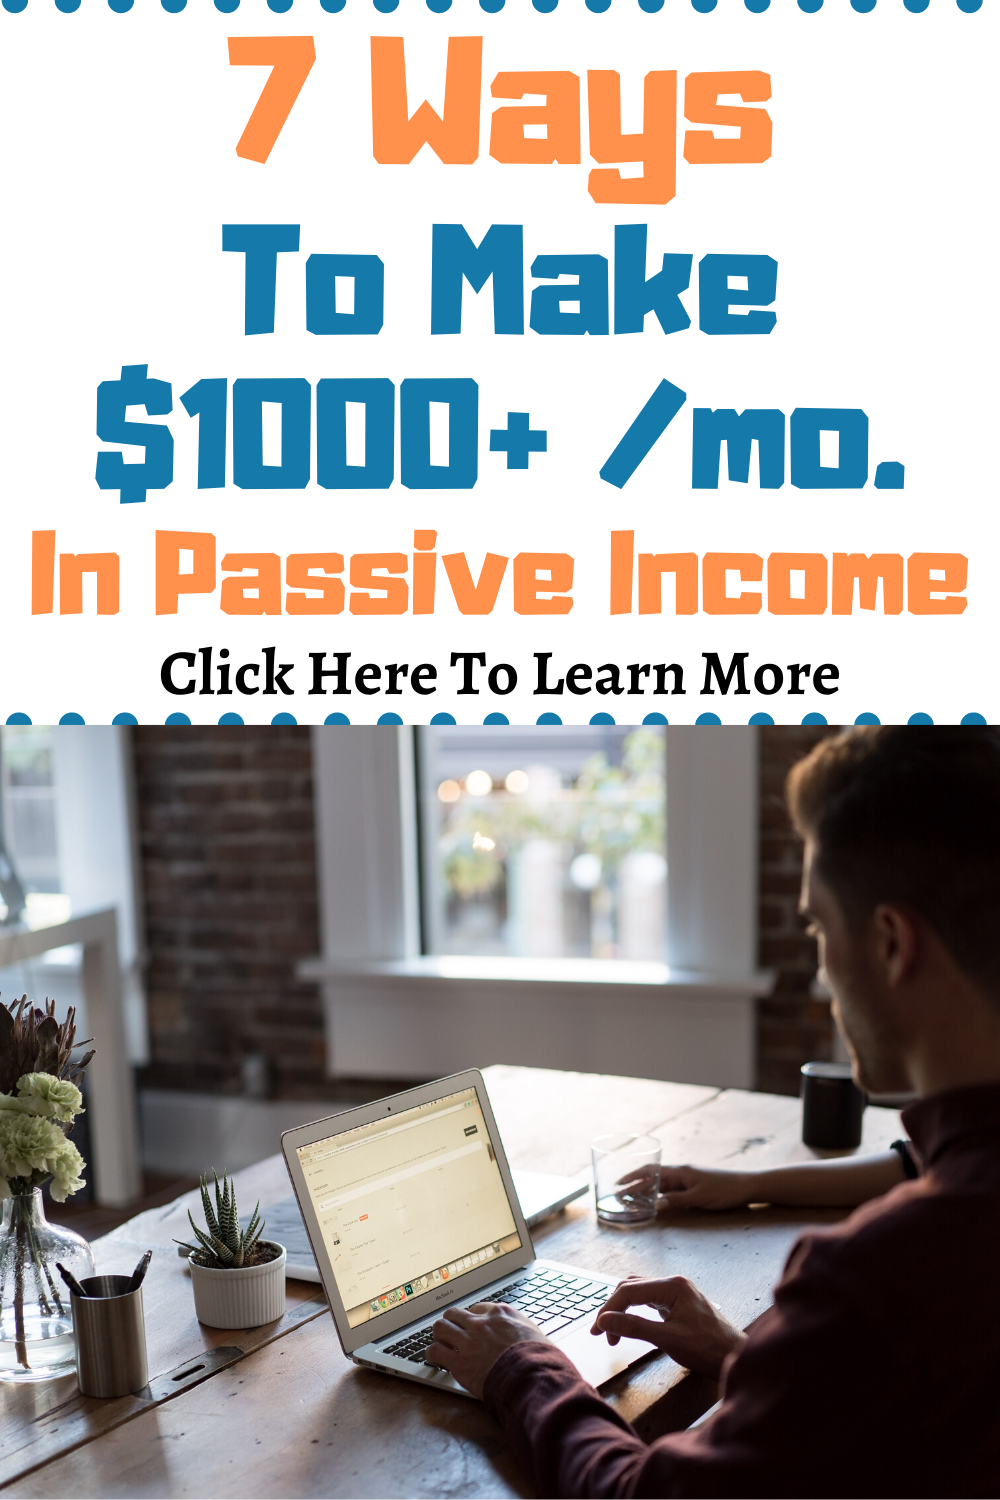 7 Ways To Make $1000 A Month Passive Income in 2020 ...